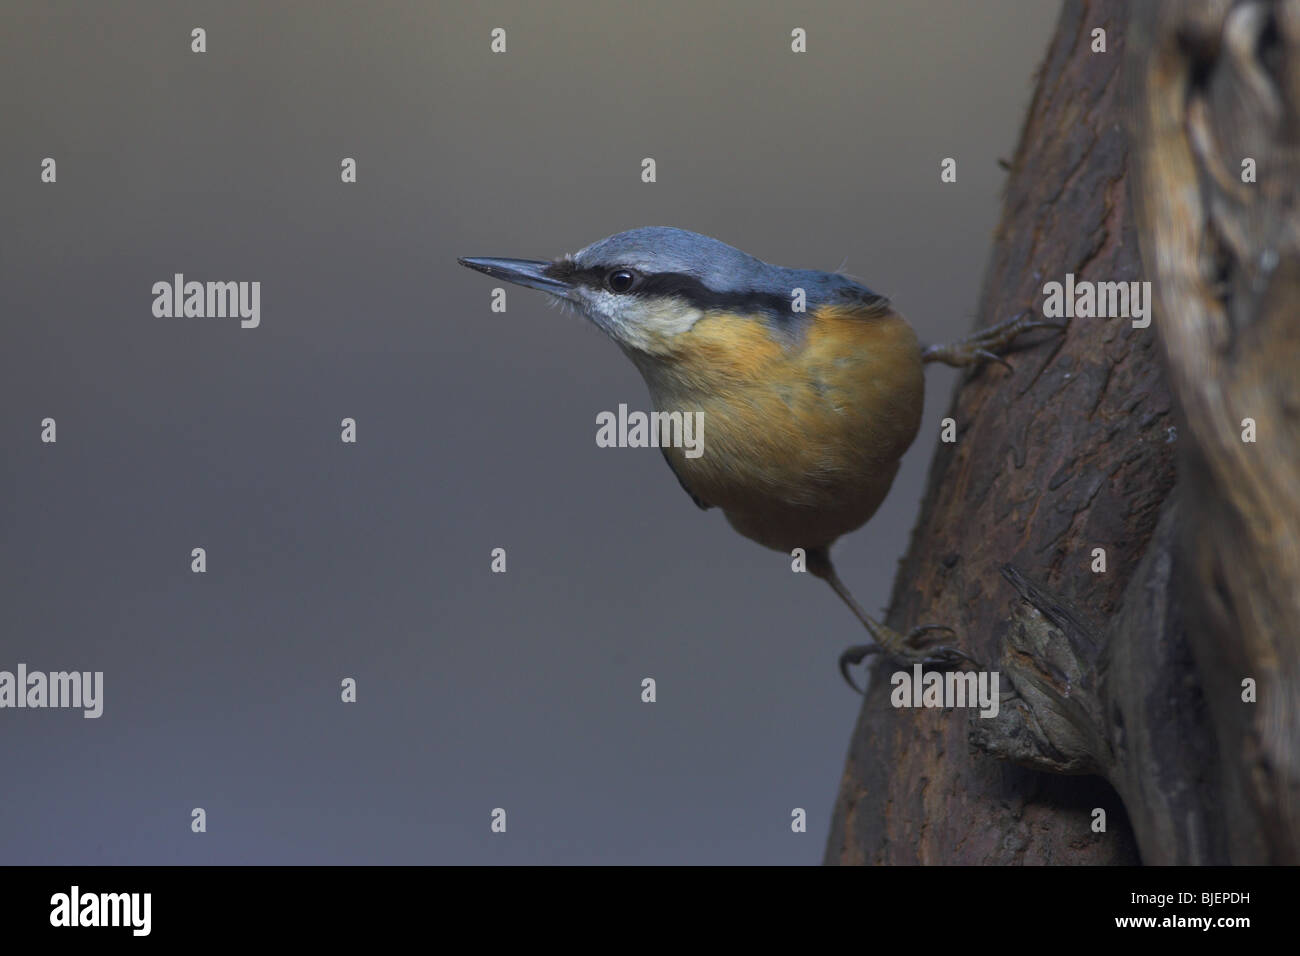 European nuthatch Sitta europaea on the trunk of a tree looking left Stock Photo